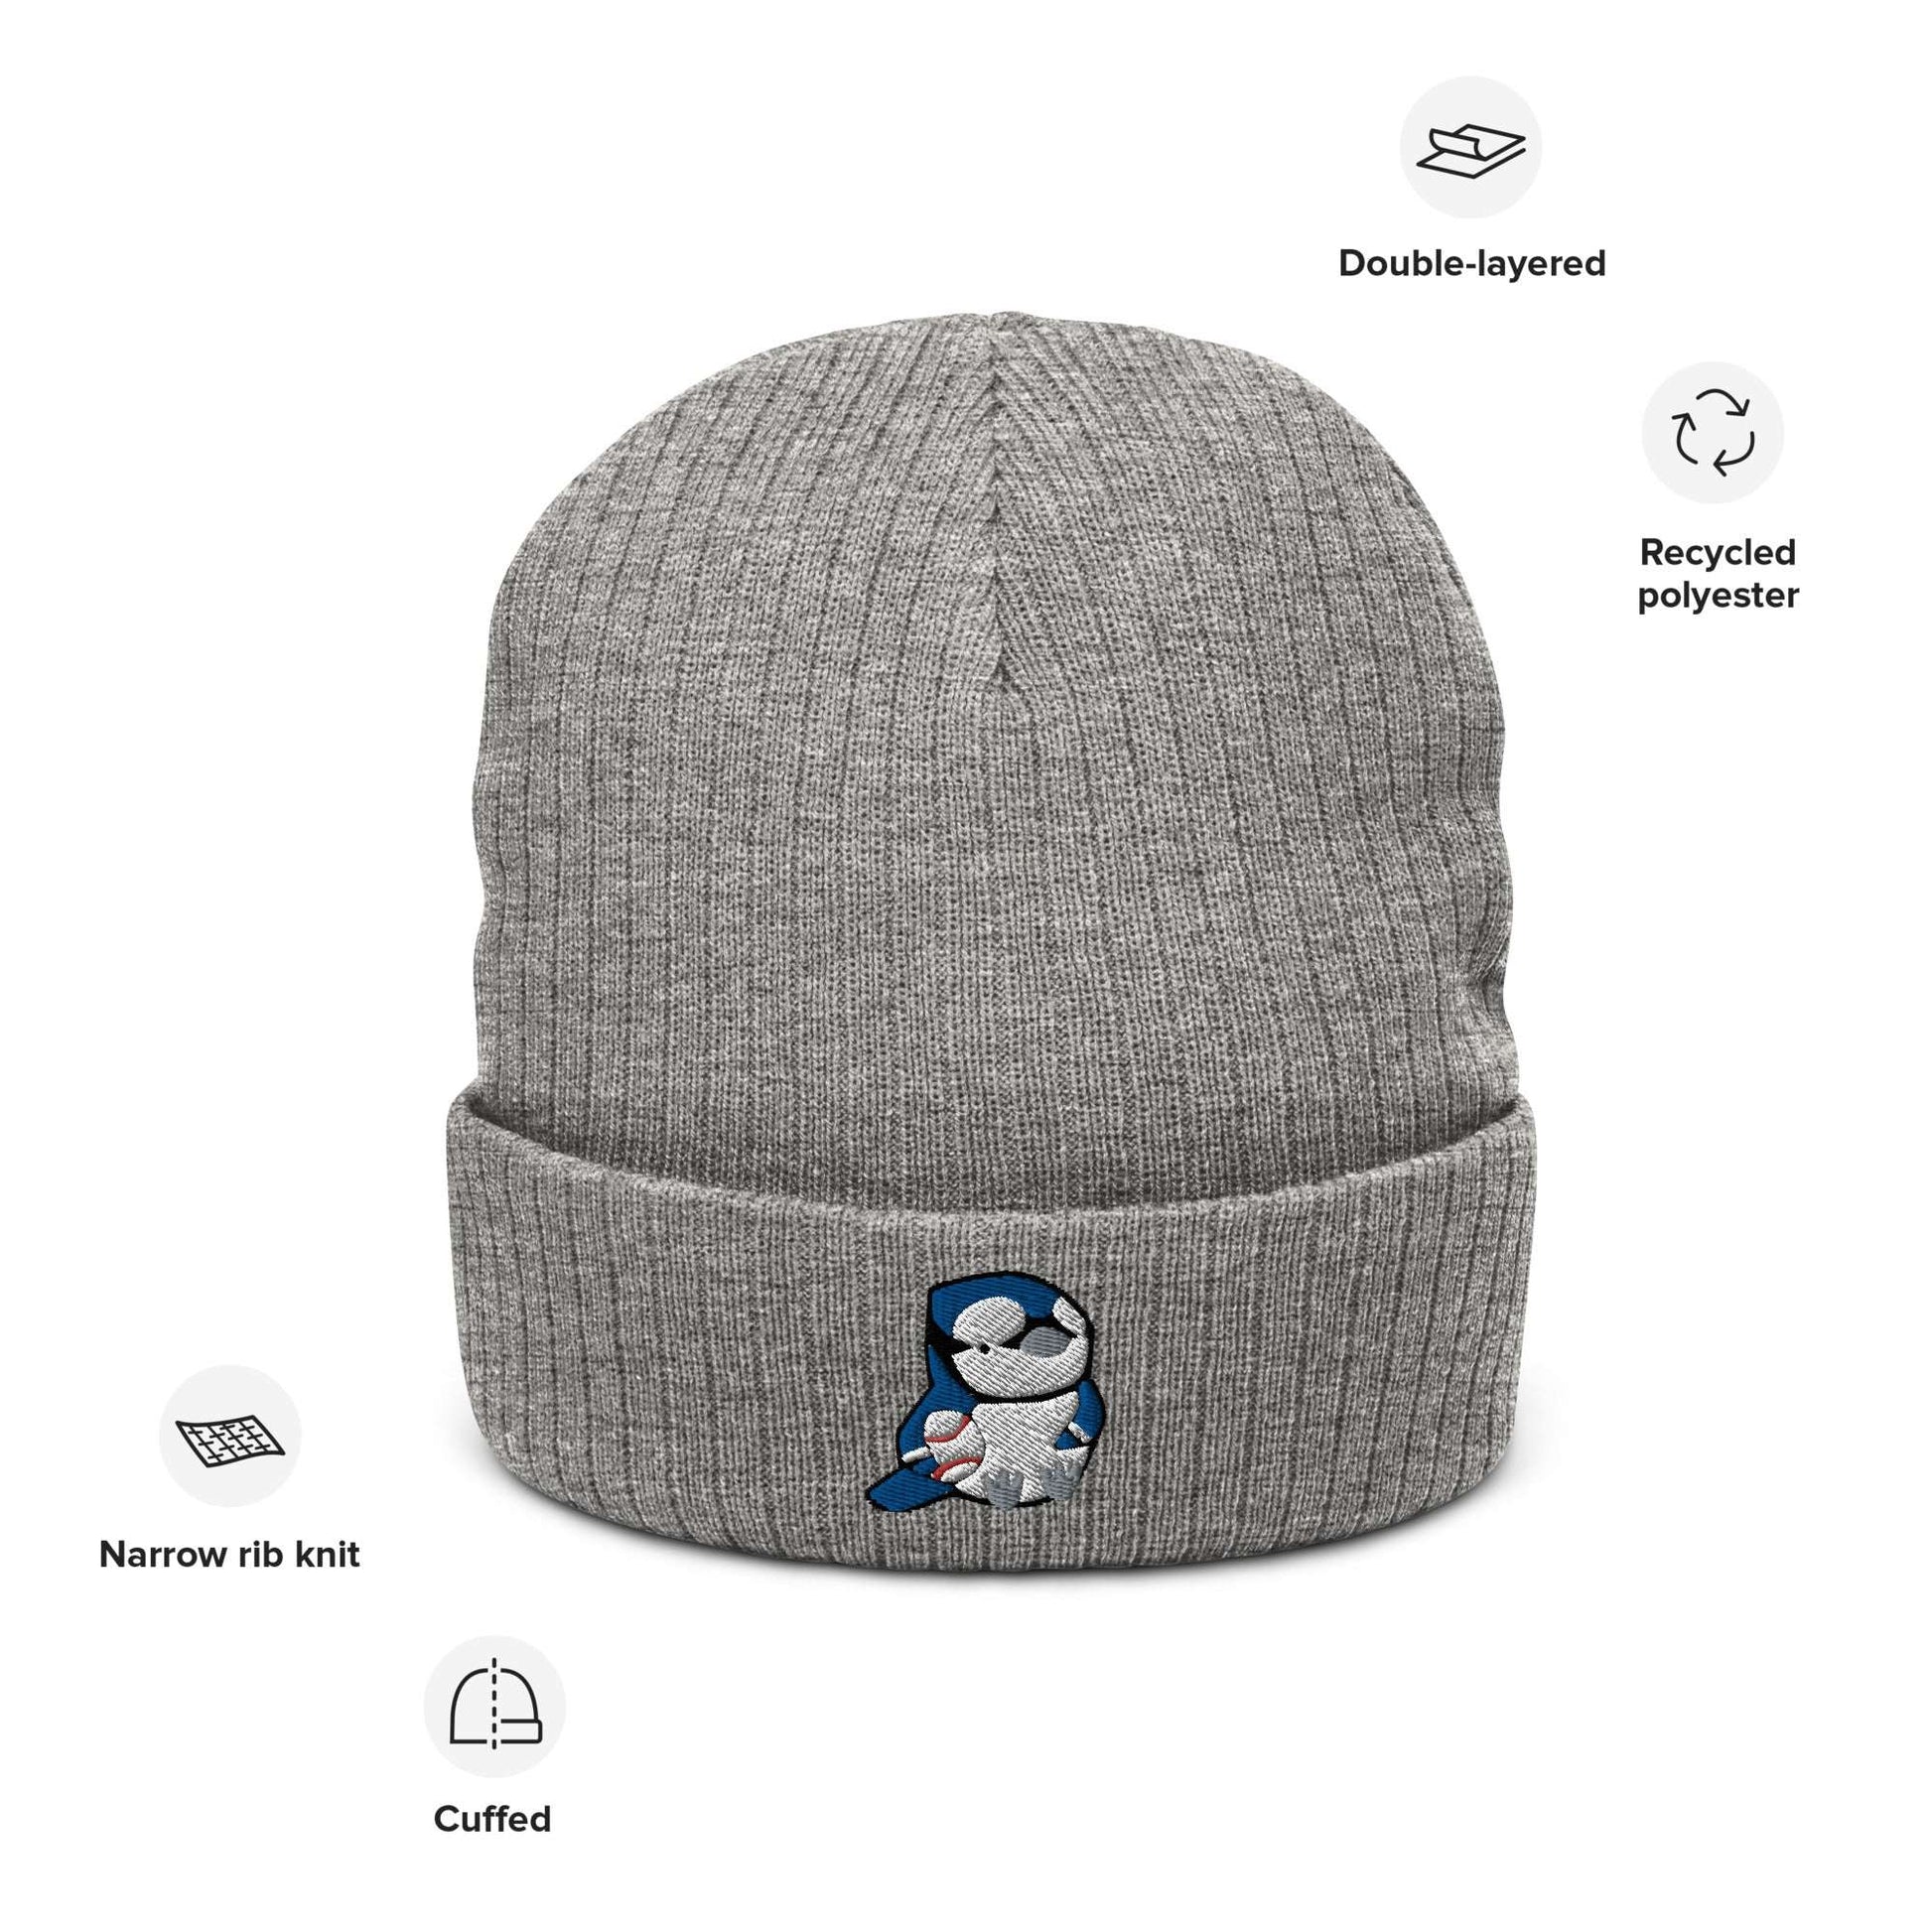 Embroidered ribbed Beanie with Blue Jay Bird Holding a Baseball